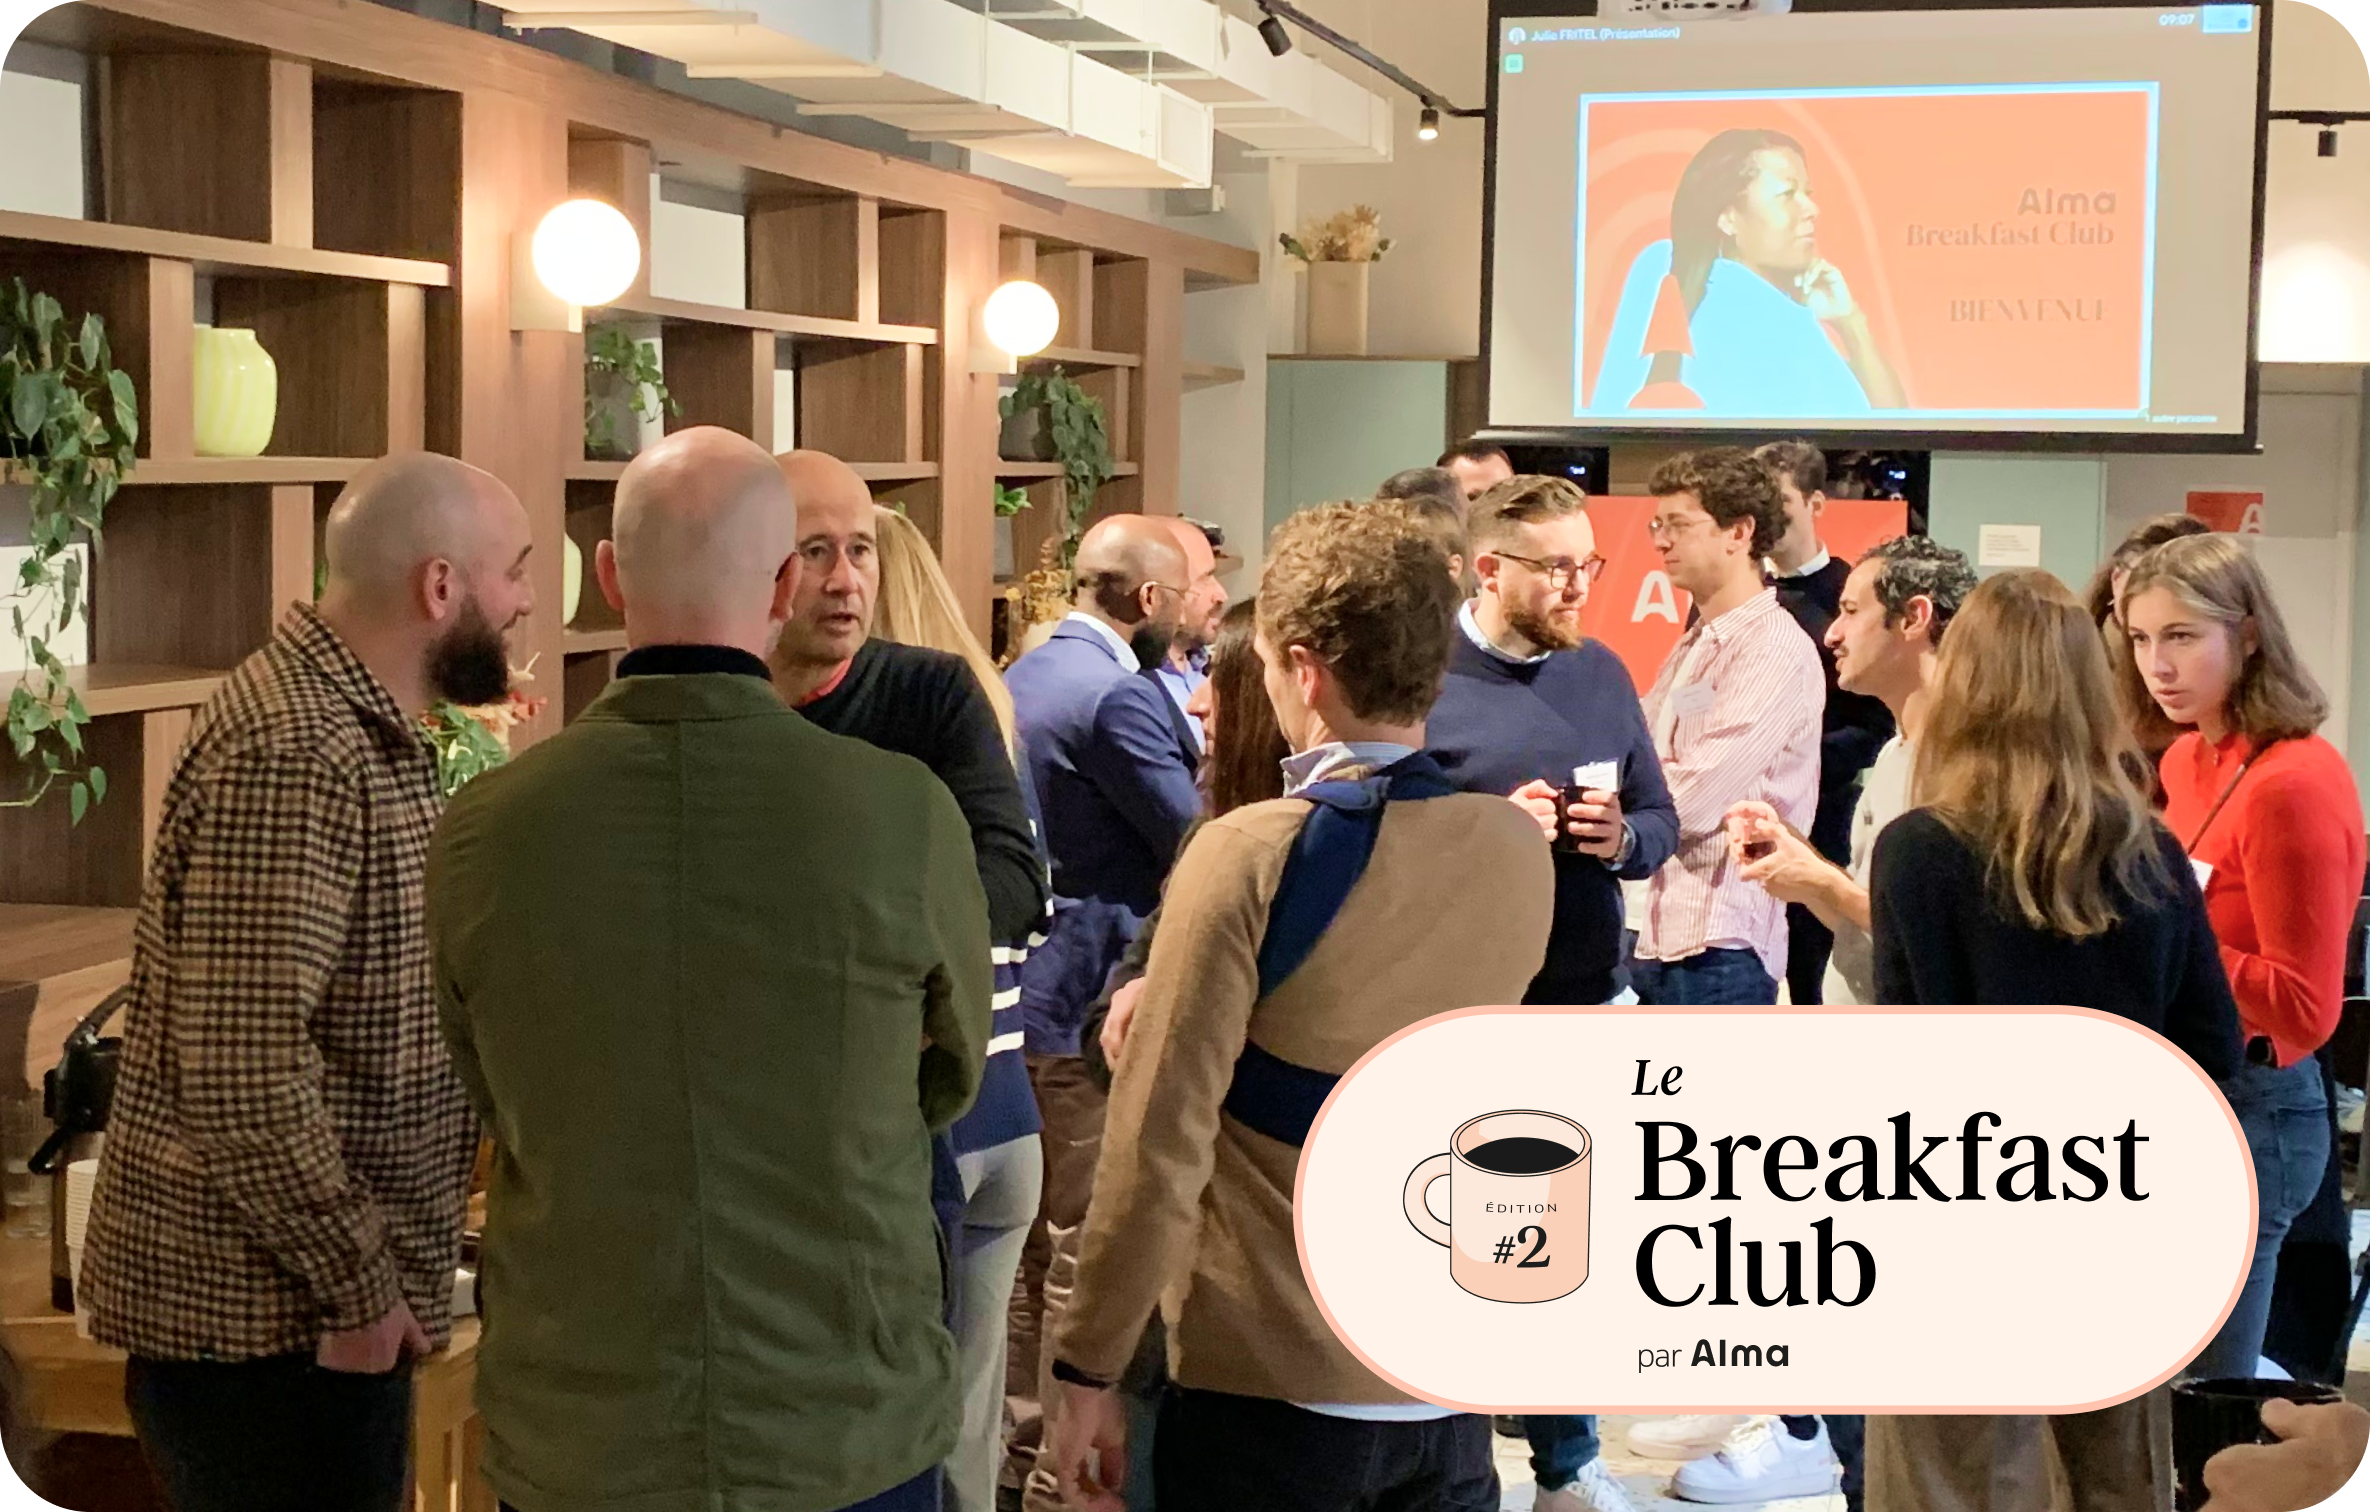 Save the date - Breakfast Club #2 (28 mars, 9h)